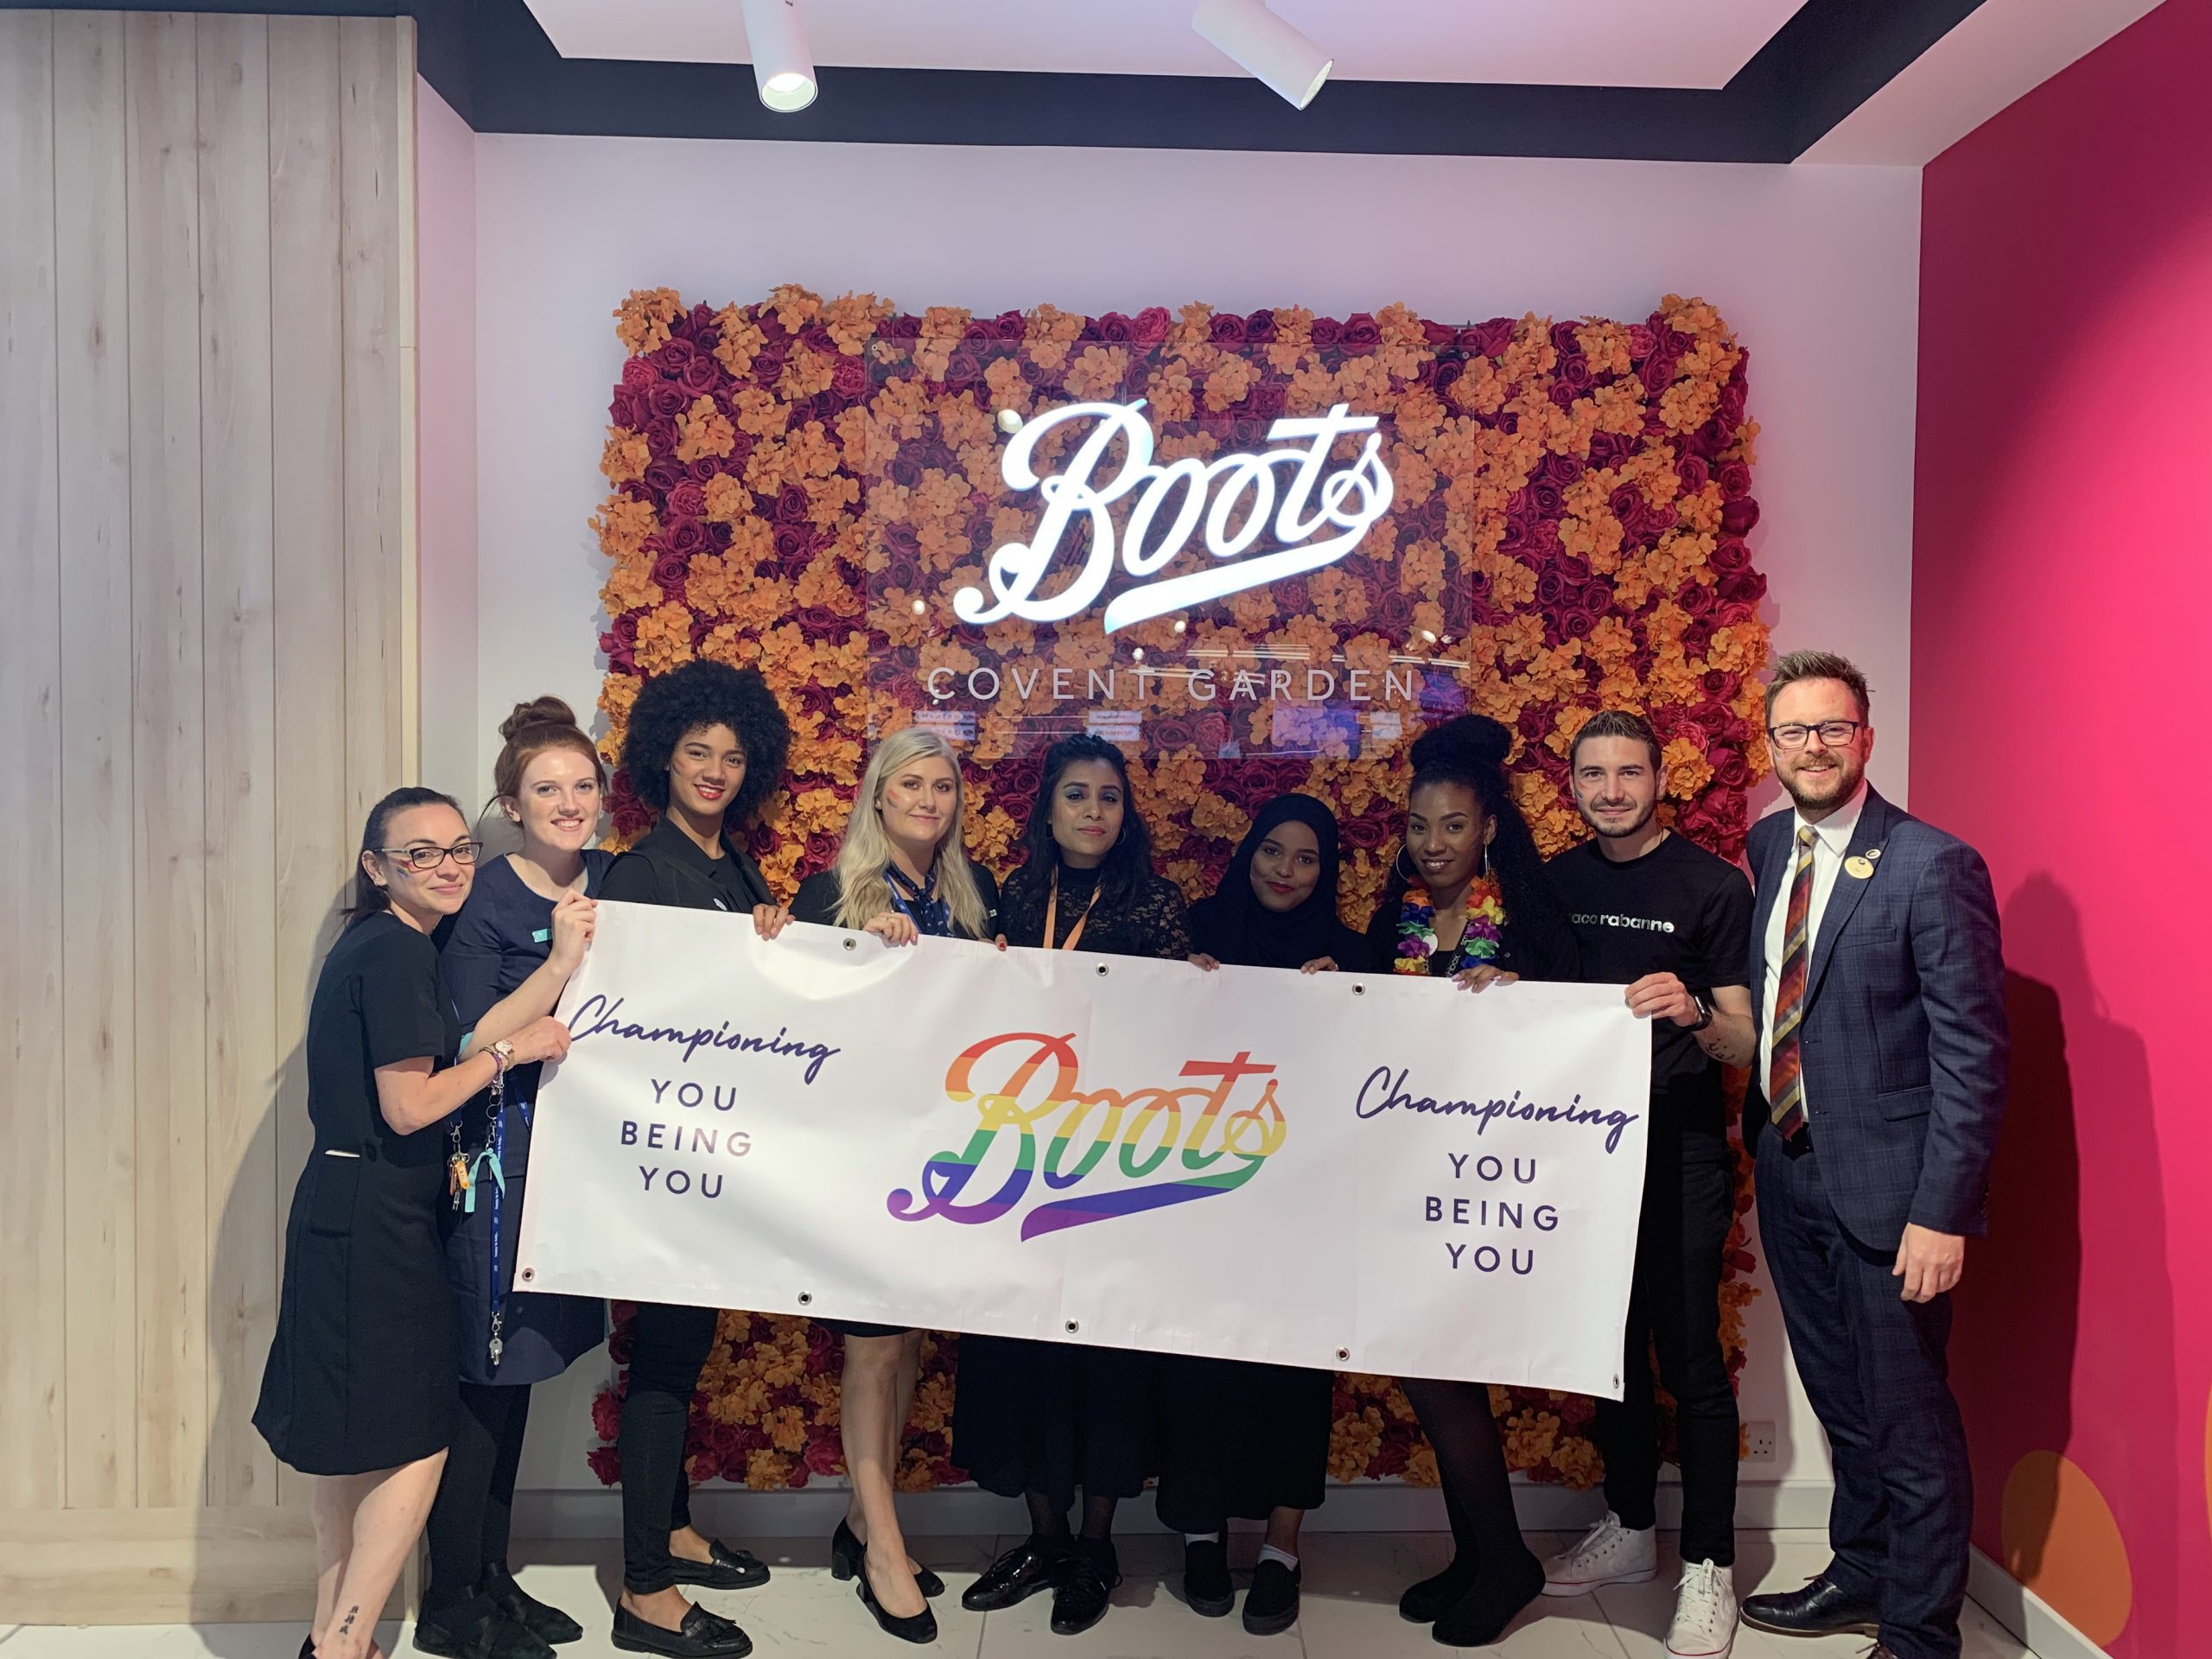 Boots Event at Covent Garden